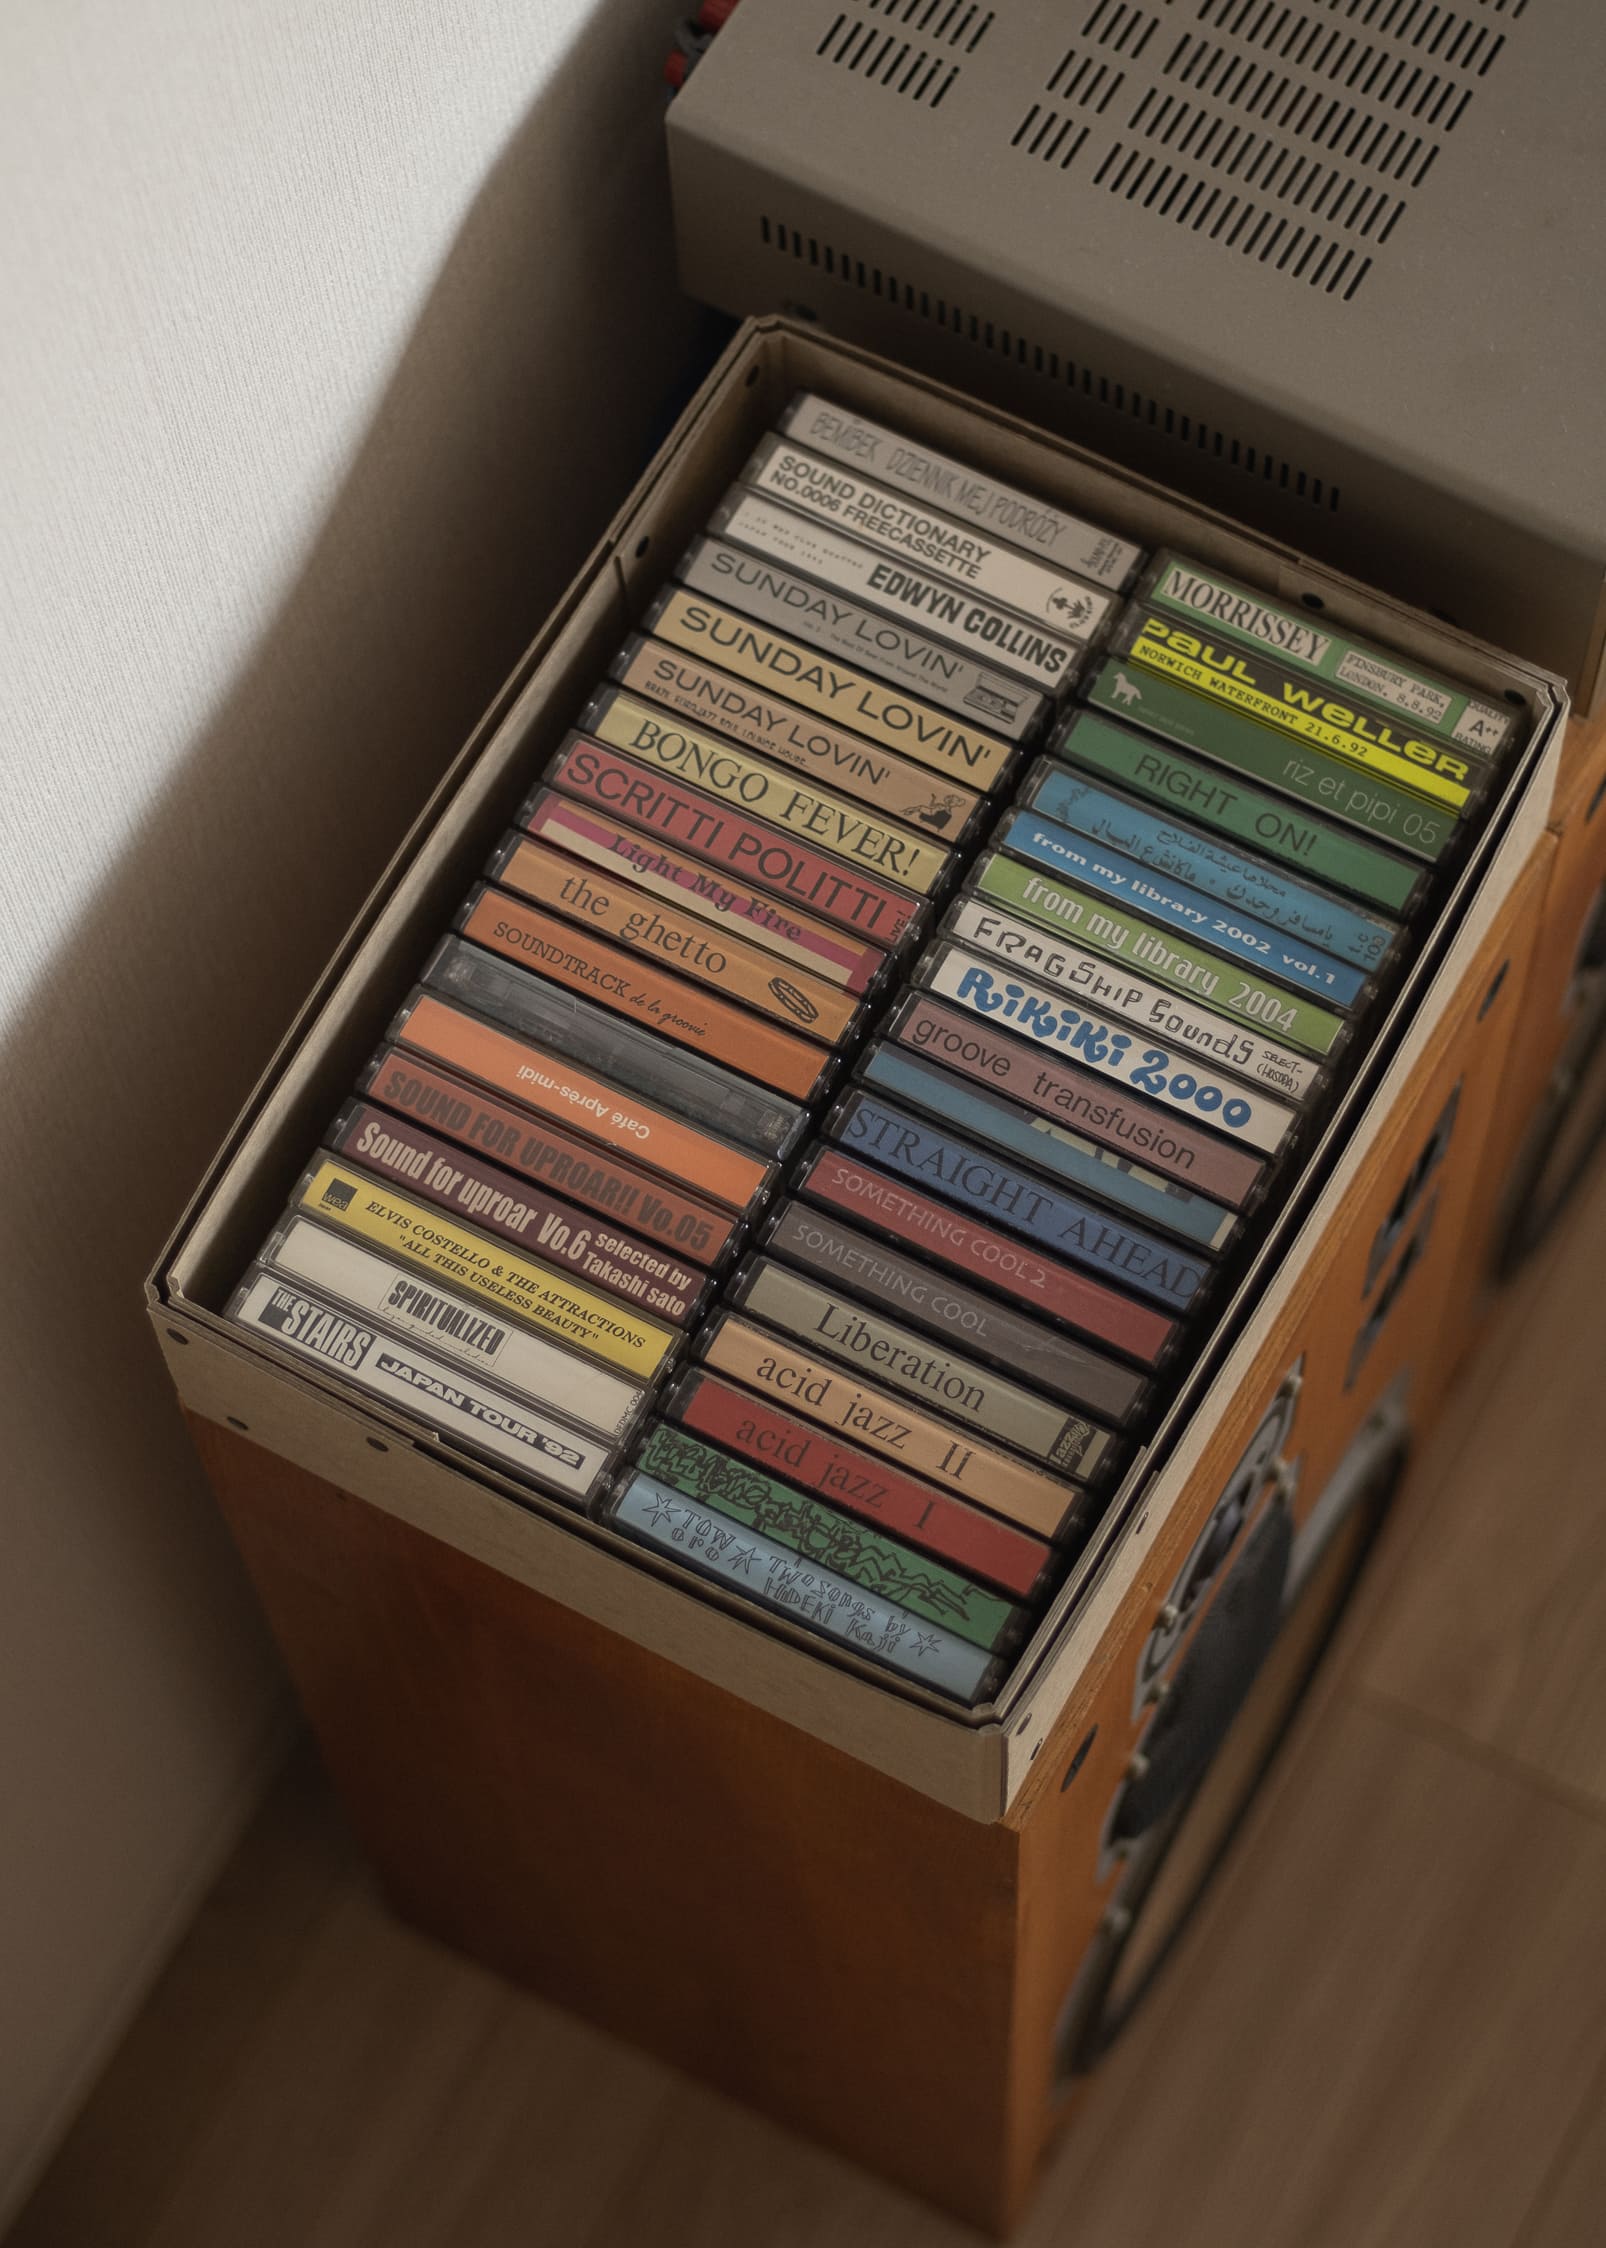 FROME Archival storage box "Rivet Box" / How to use / Storing cassette tapes